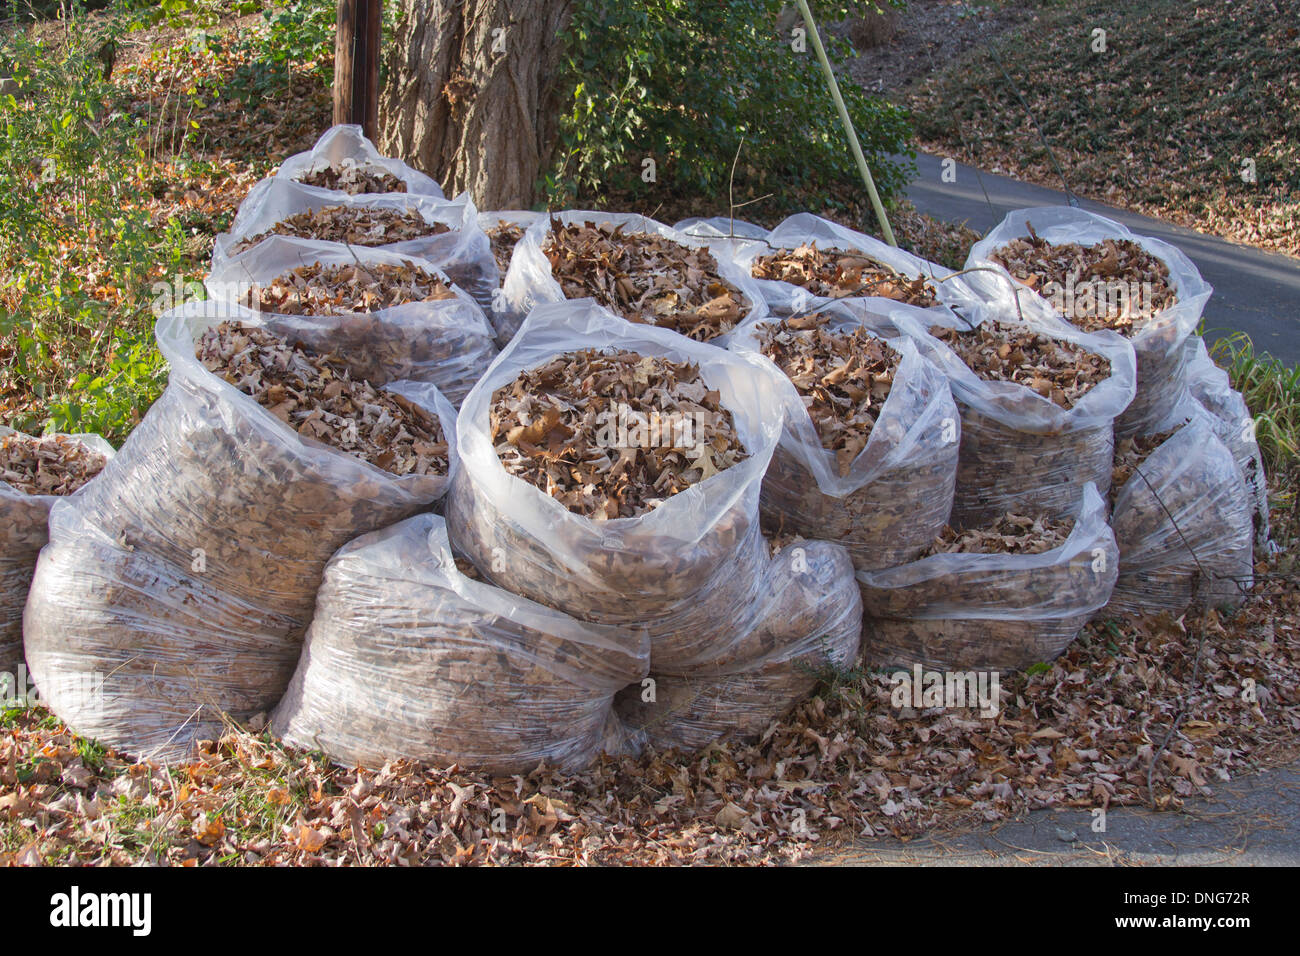 A large group of plastic bags holding raked up oak tree leaves in autumn Stock Photo